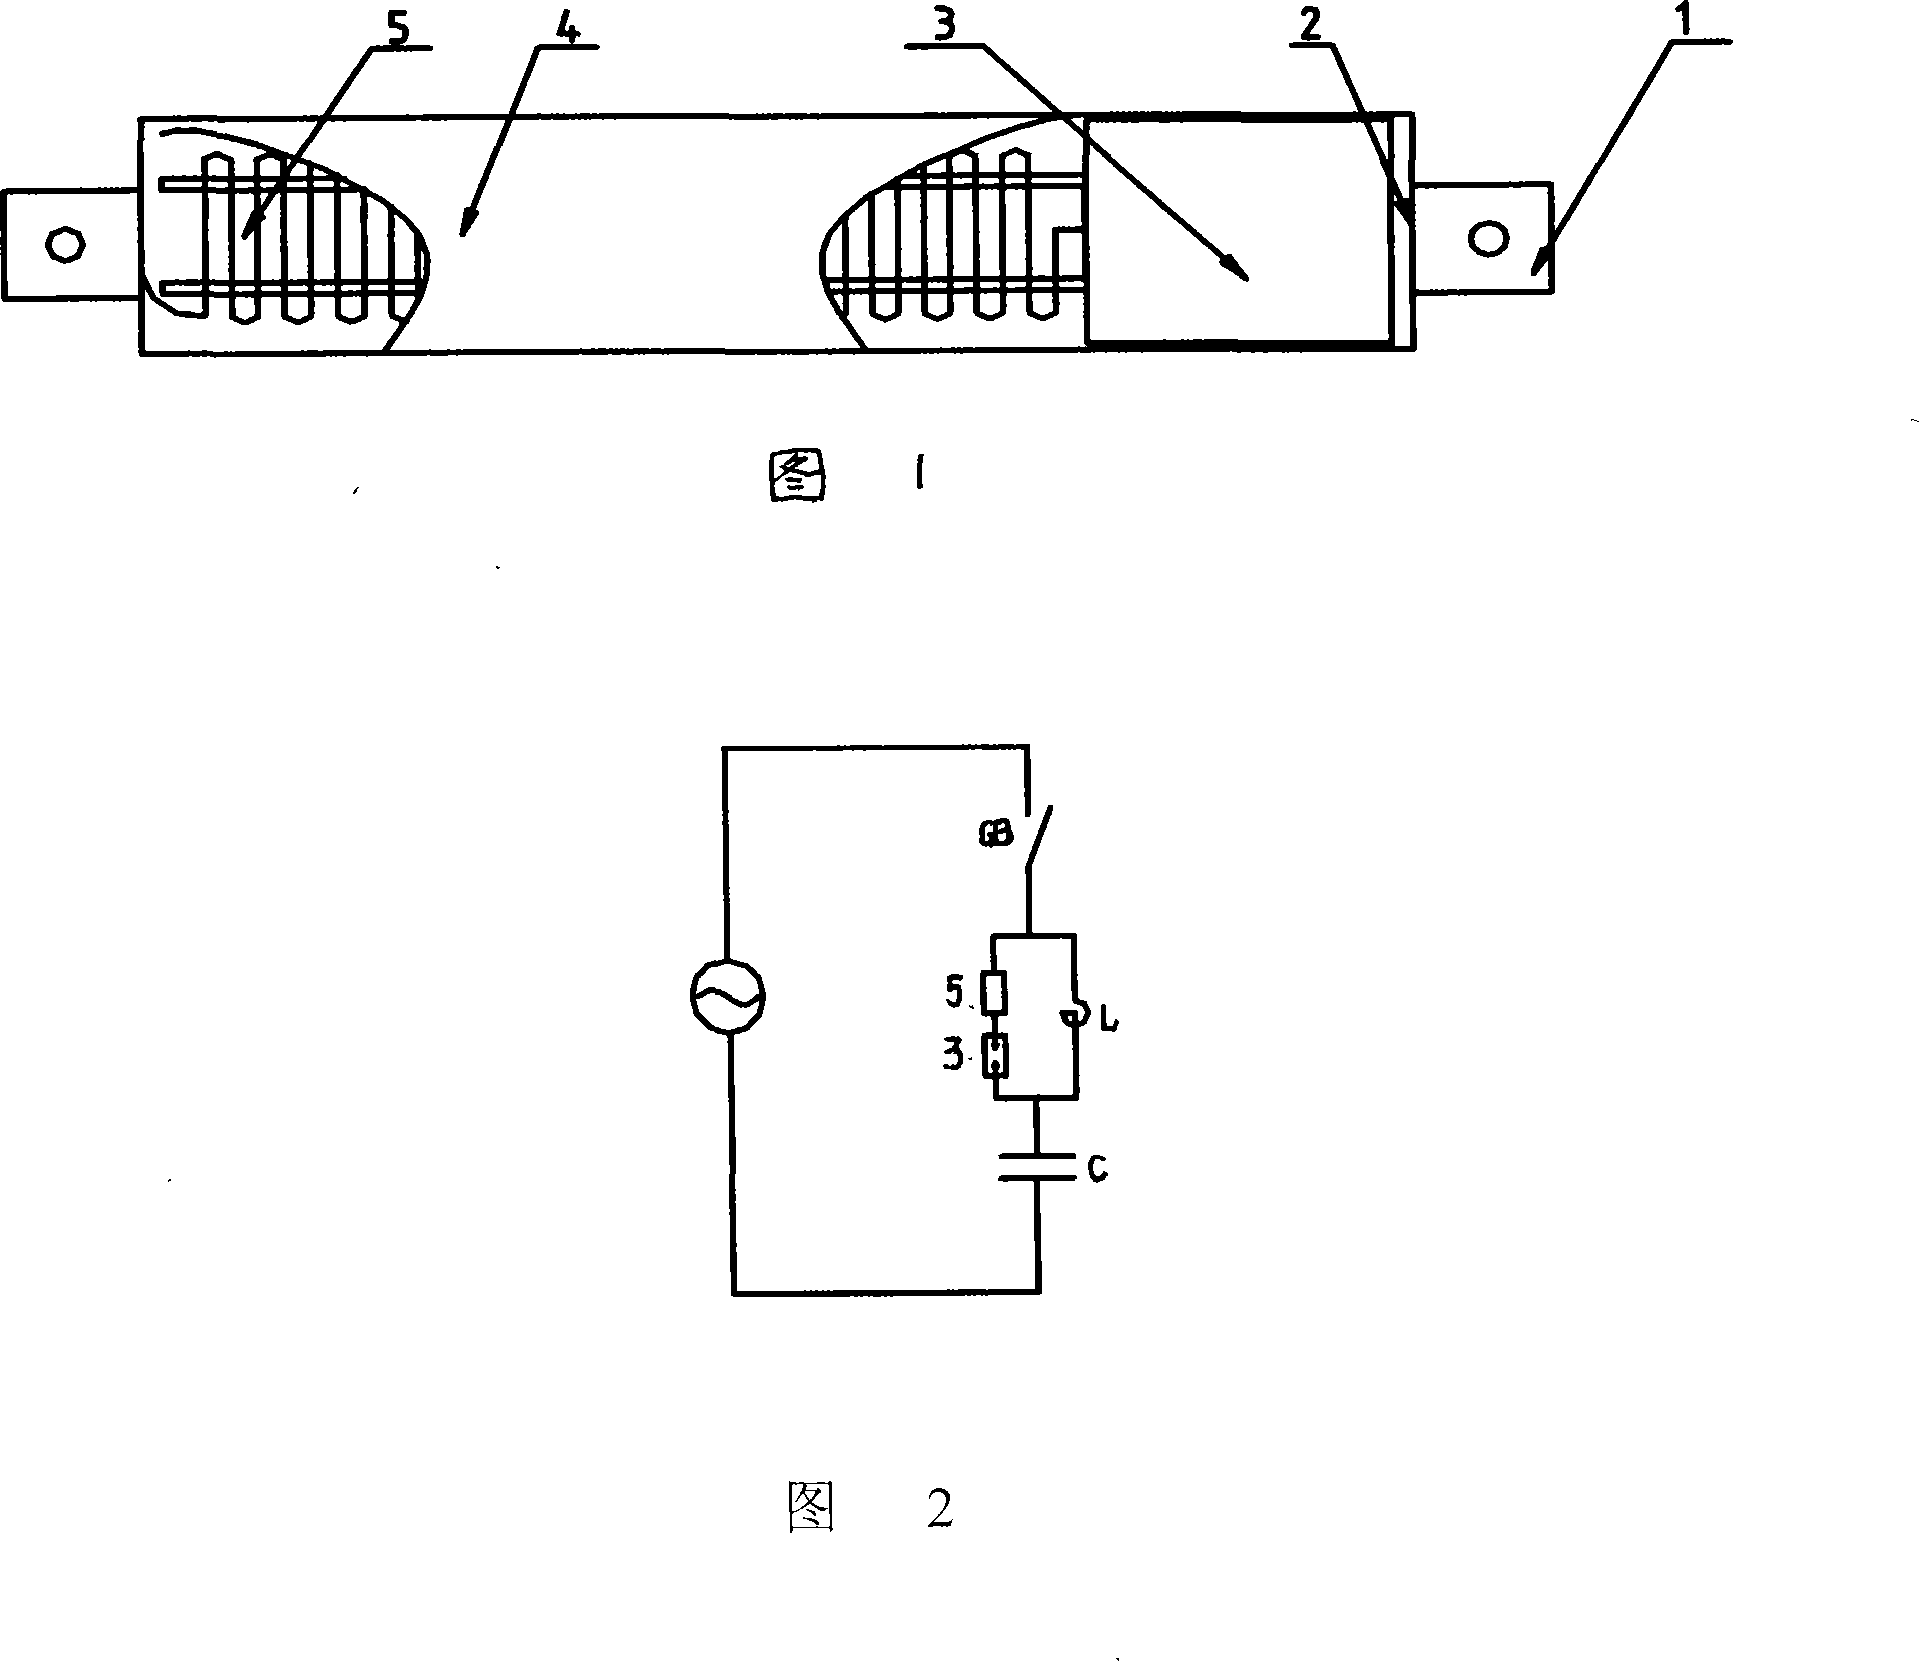 An overvoltage damping device of interstice